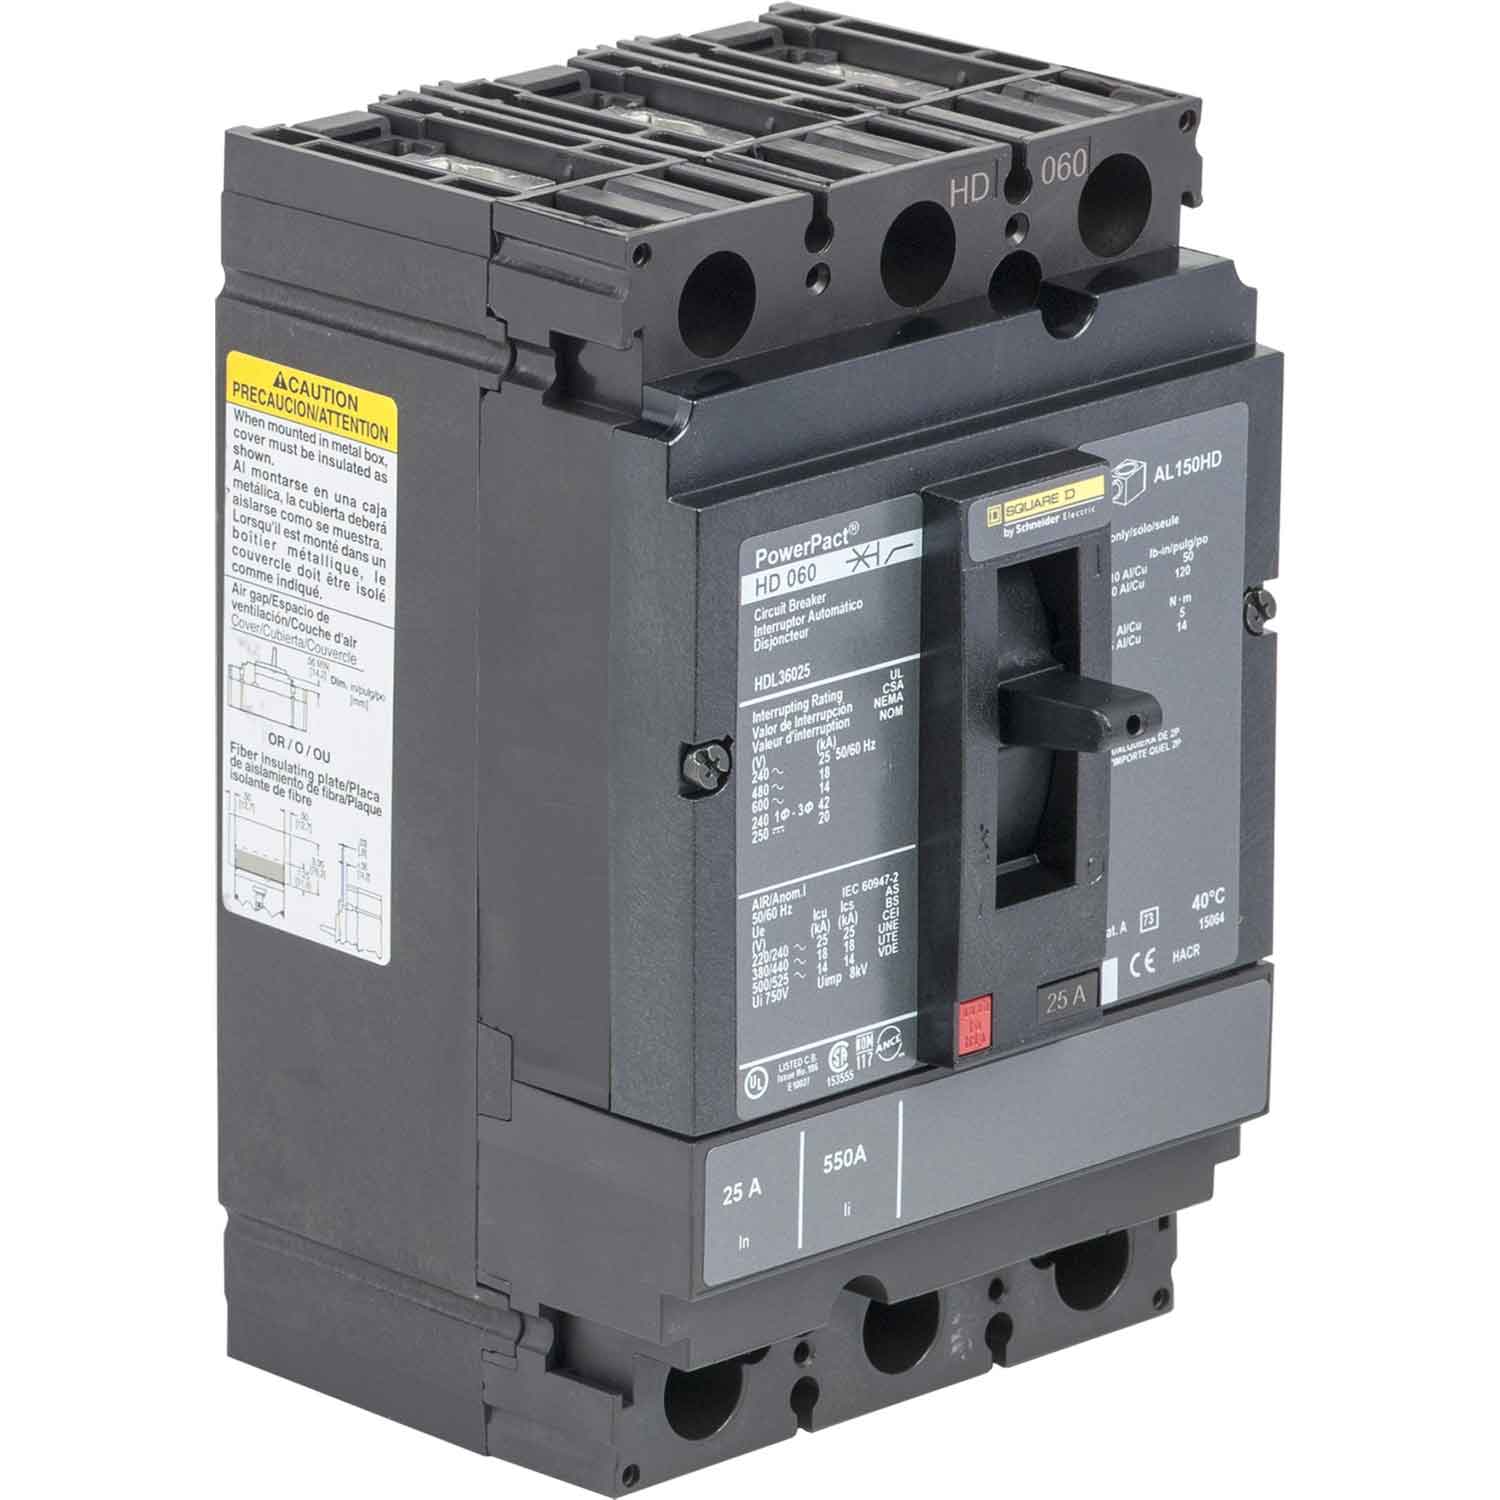 HJL36035 - Square D - Molded Case Circuit Breakers